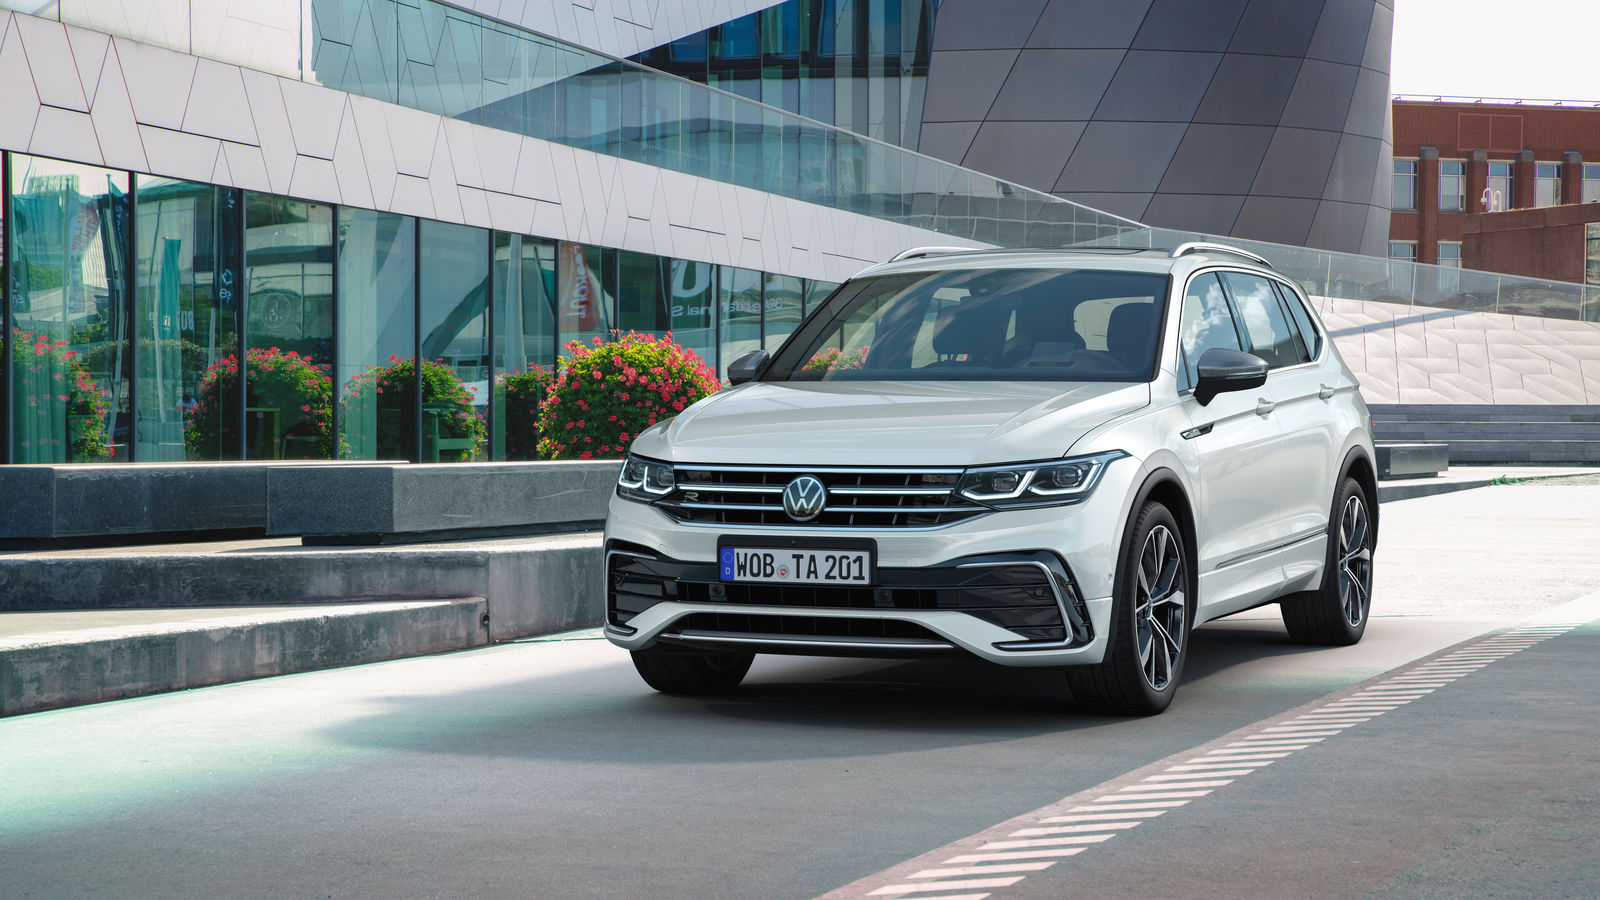 The new Tiguan Allspace – available to order now